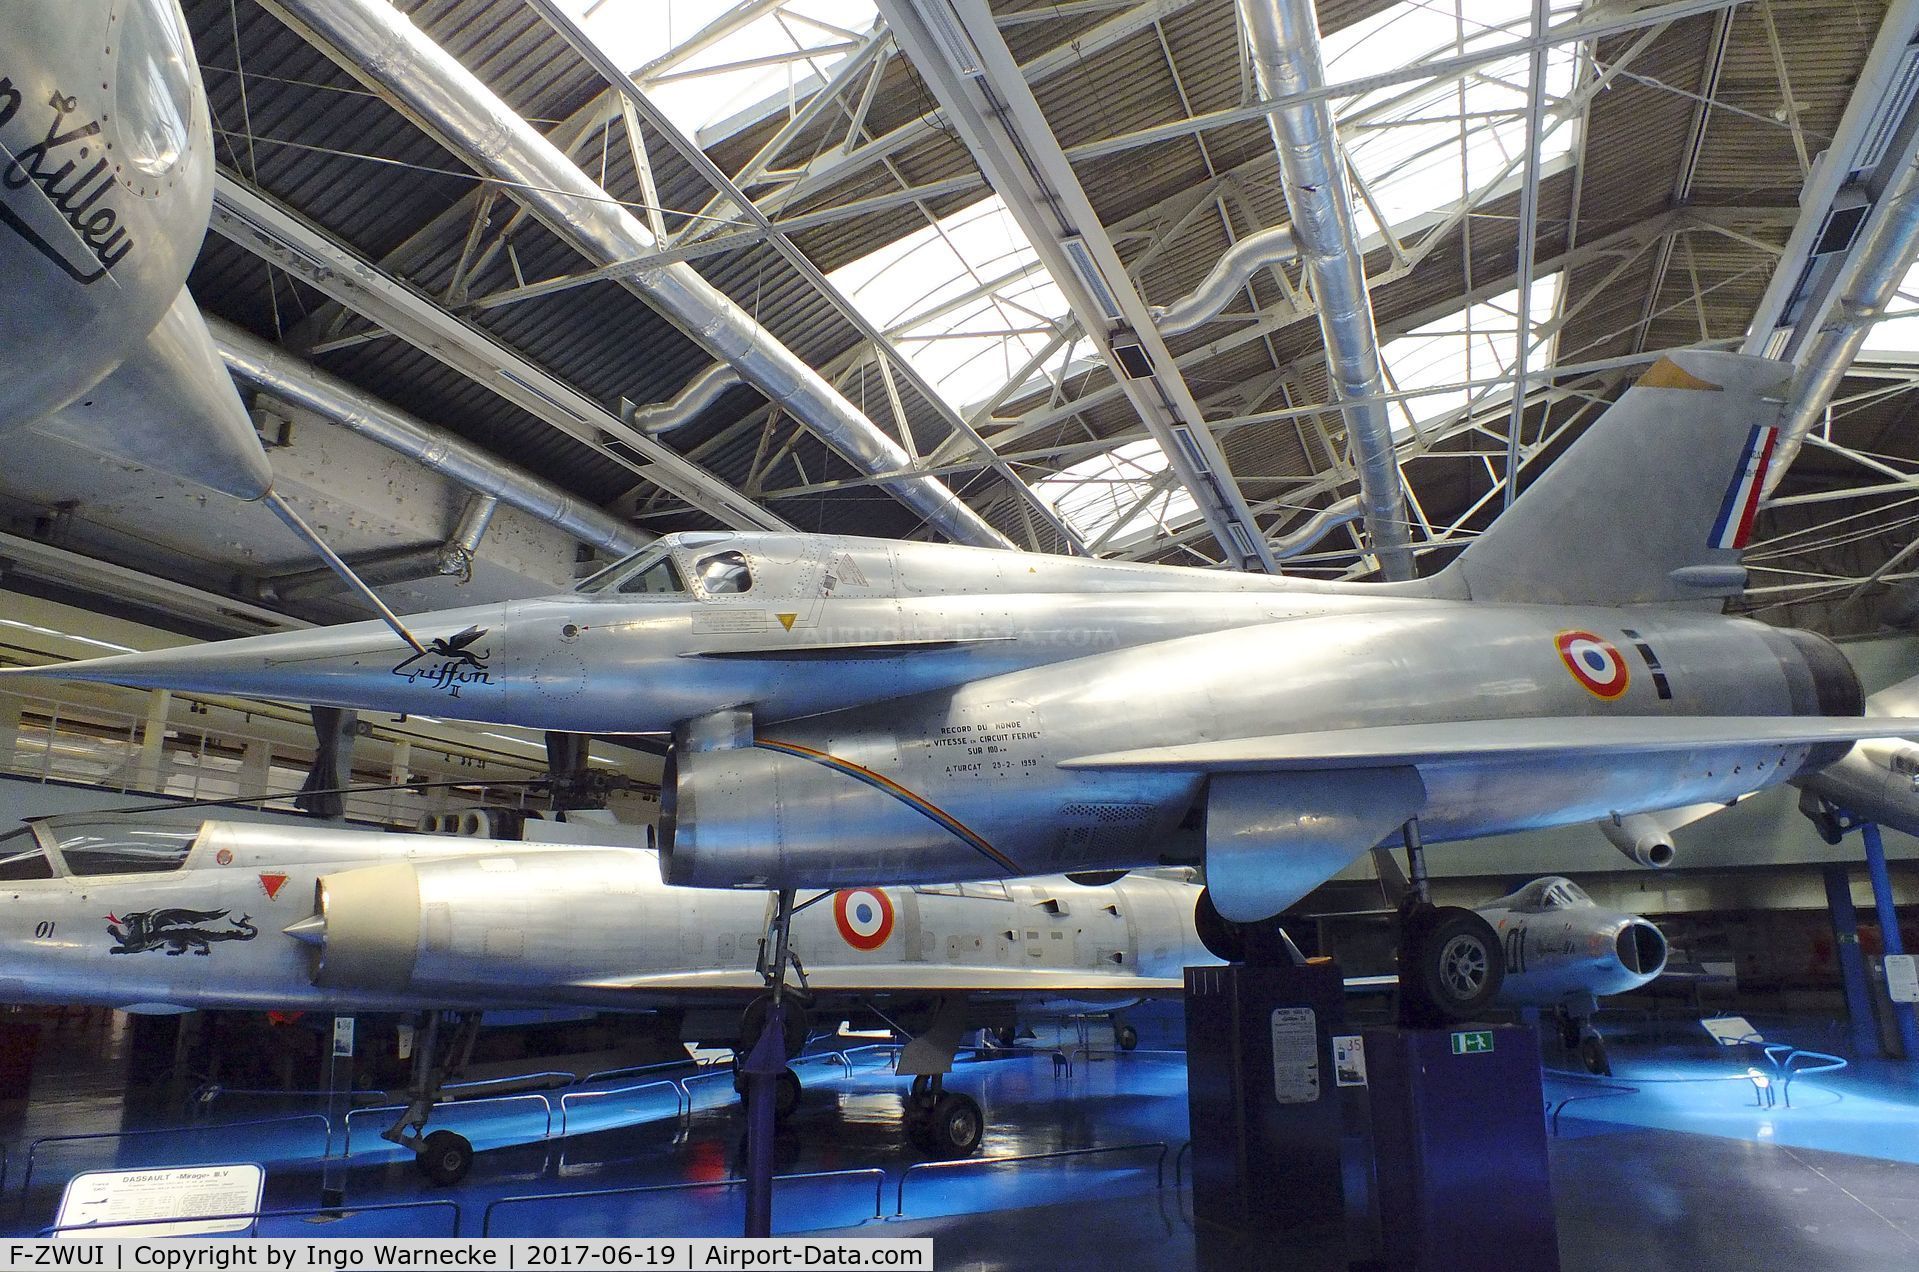 F-ZWUI, Nord 1500 Griffon II C/N 02, Nord N.1500 Griffon II at the Musee de l'Air, Paris/Le Bourget